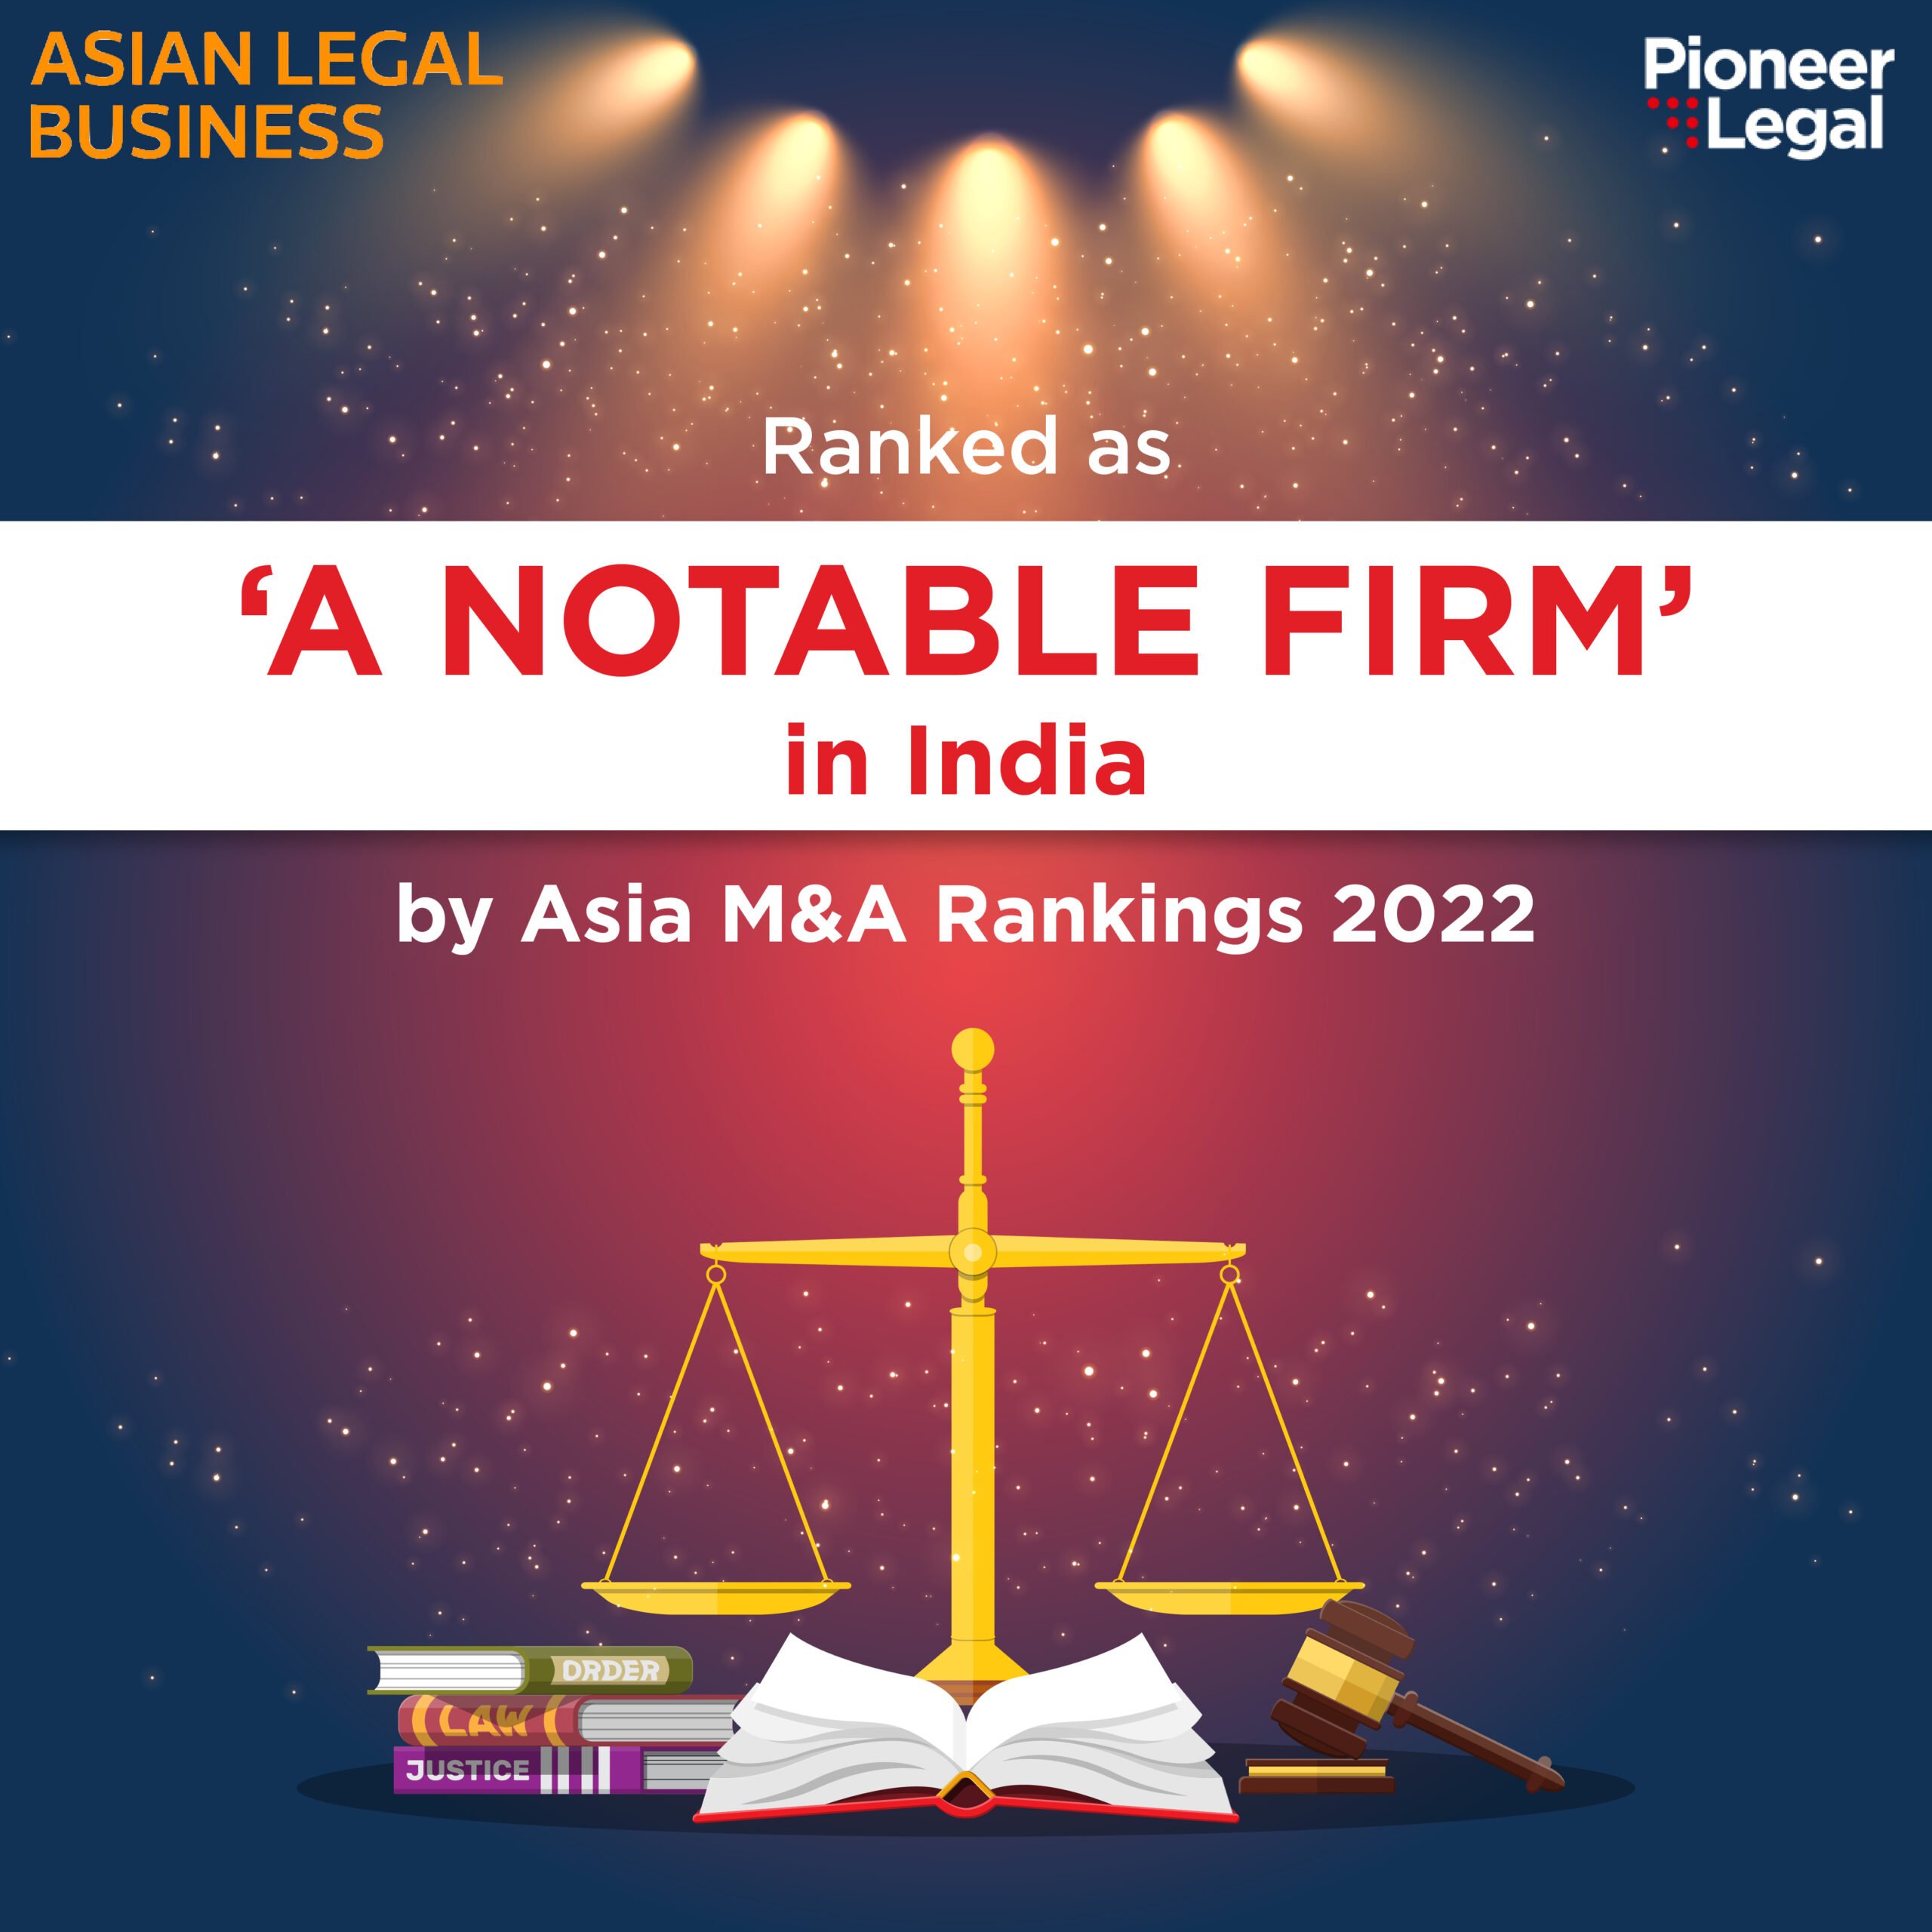 Pioneer Legal - We are stoked to be regarded as a ‘Notable Firm’ in India, by the Asia M&A Rankings 2022, powered by Asian Legal Business.